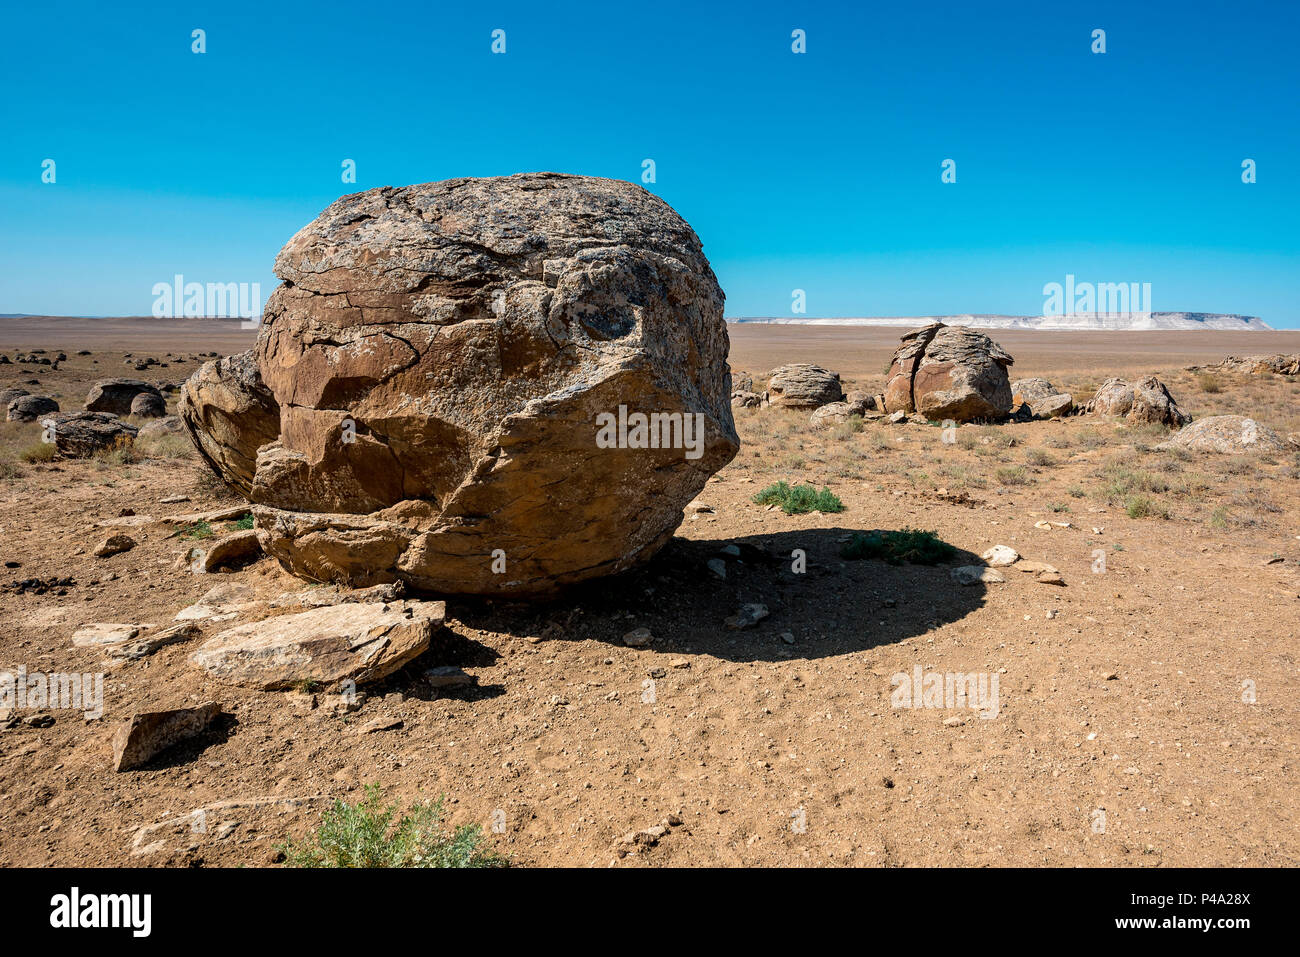 Geological spherical rock formations in the place known as Valley of Balls at Caspian Depression desert, Aktau, Mangystau region, Kazakhstan Stock Photo